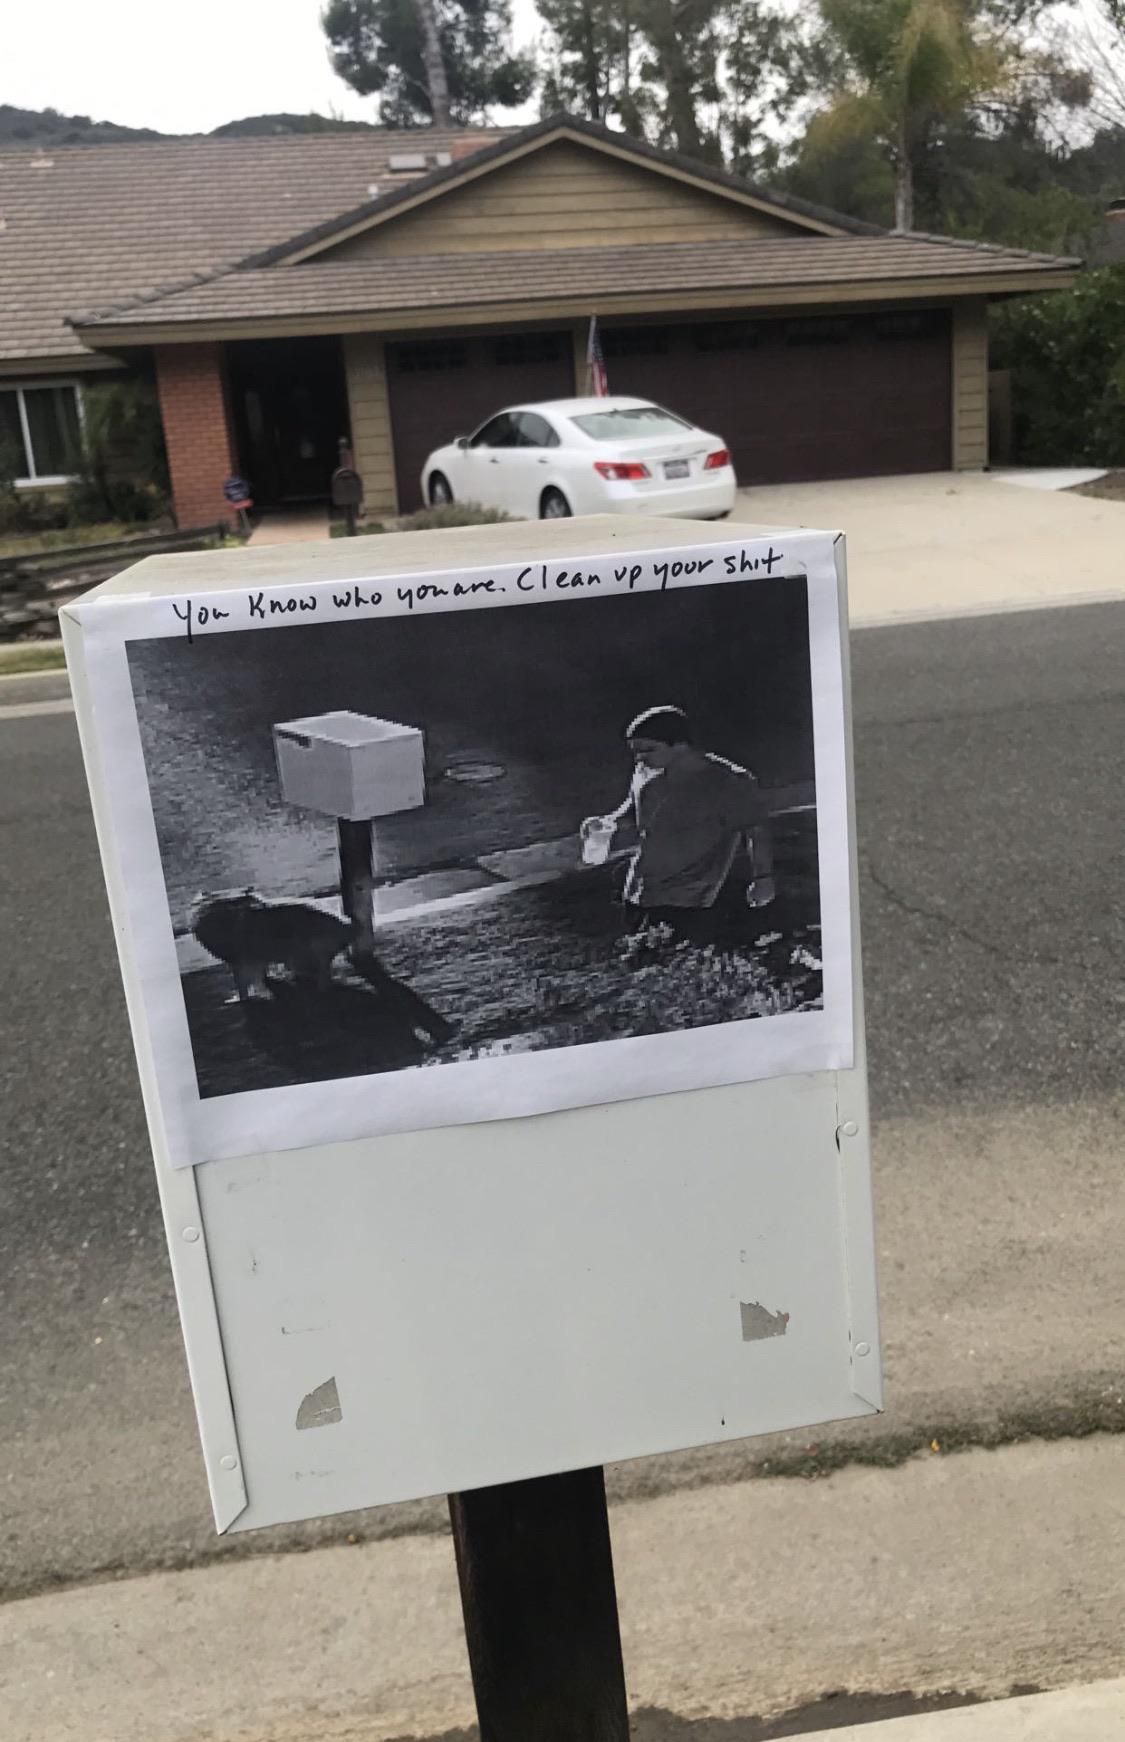 My neighbor has had enough of his...